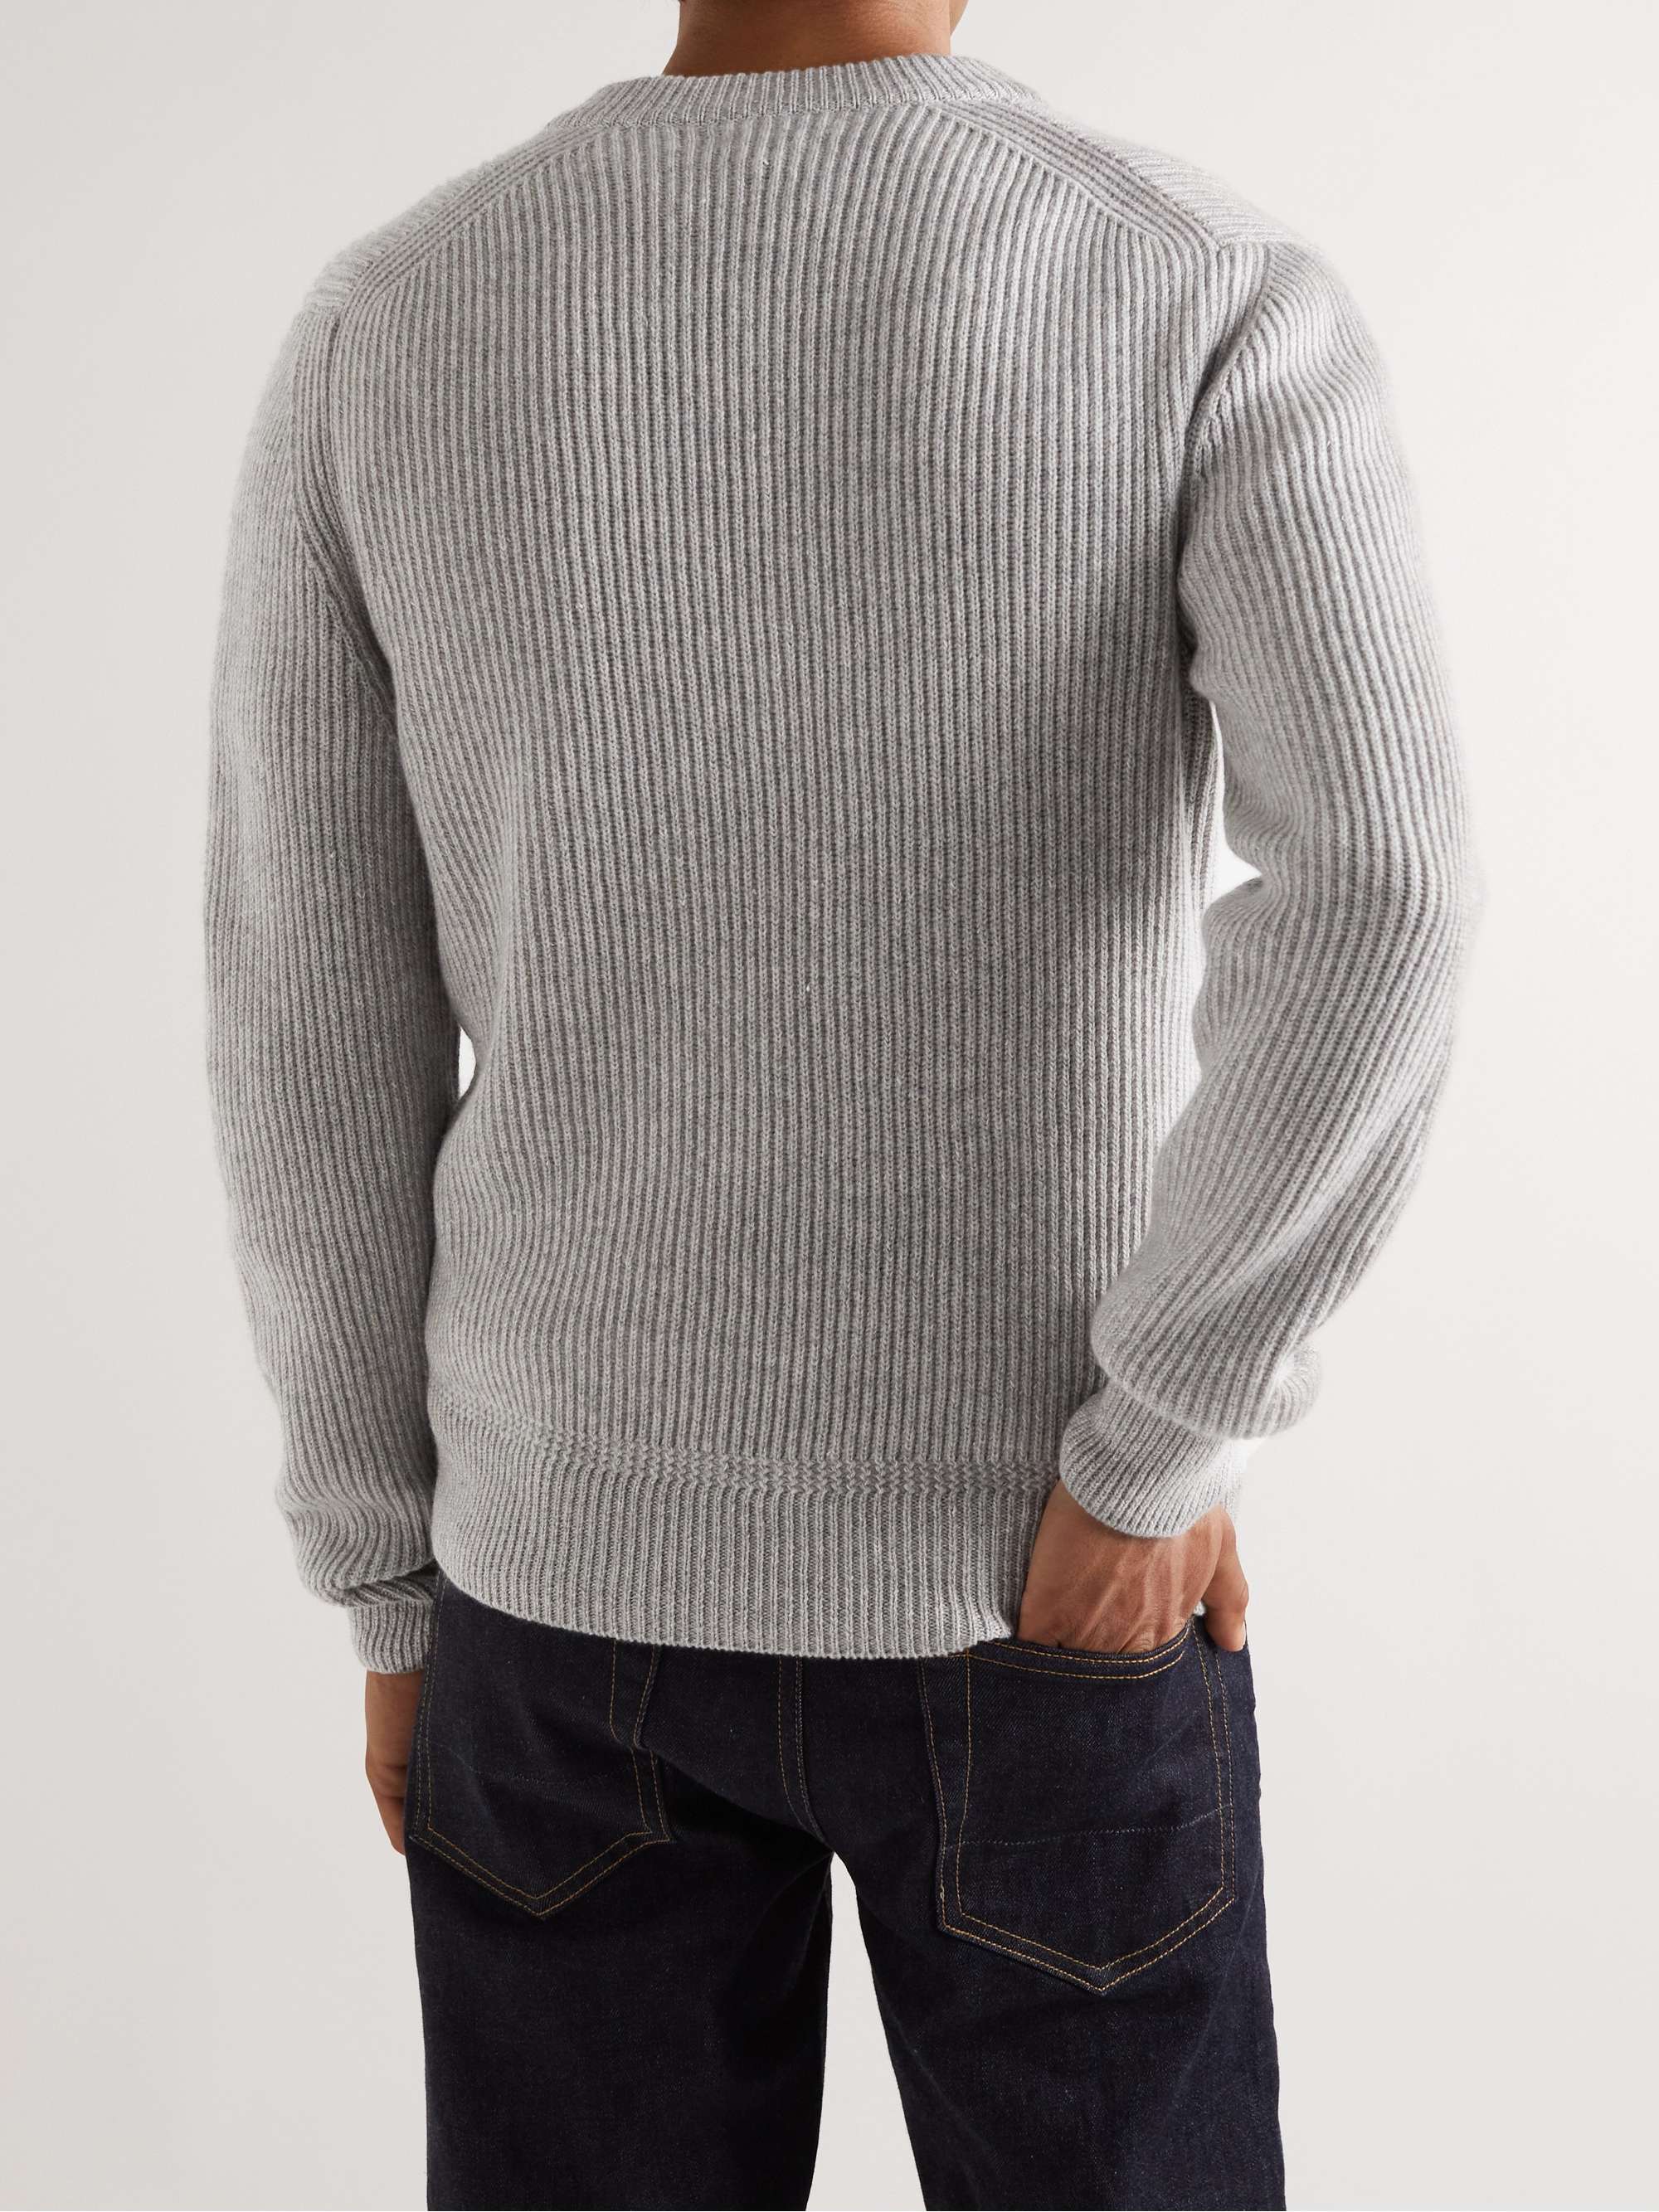 TOM FORD Ribbed Cashmere and Linen-Blend Sweater